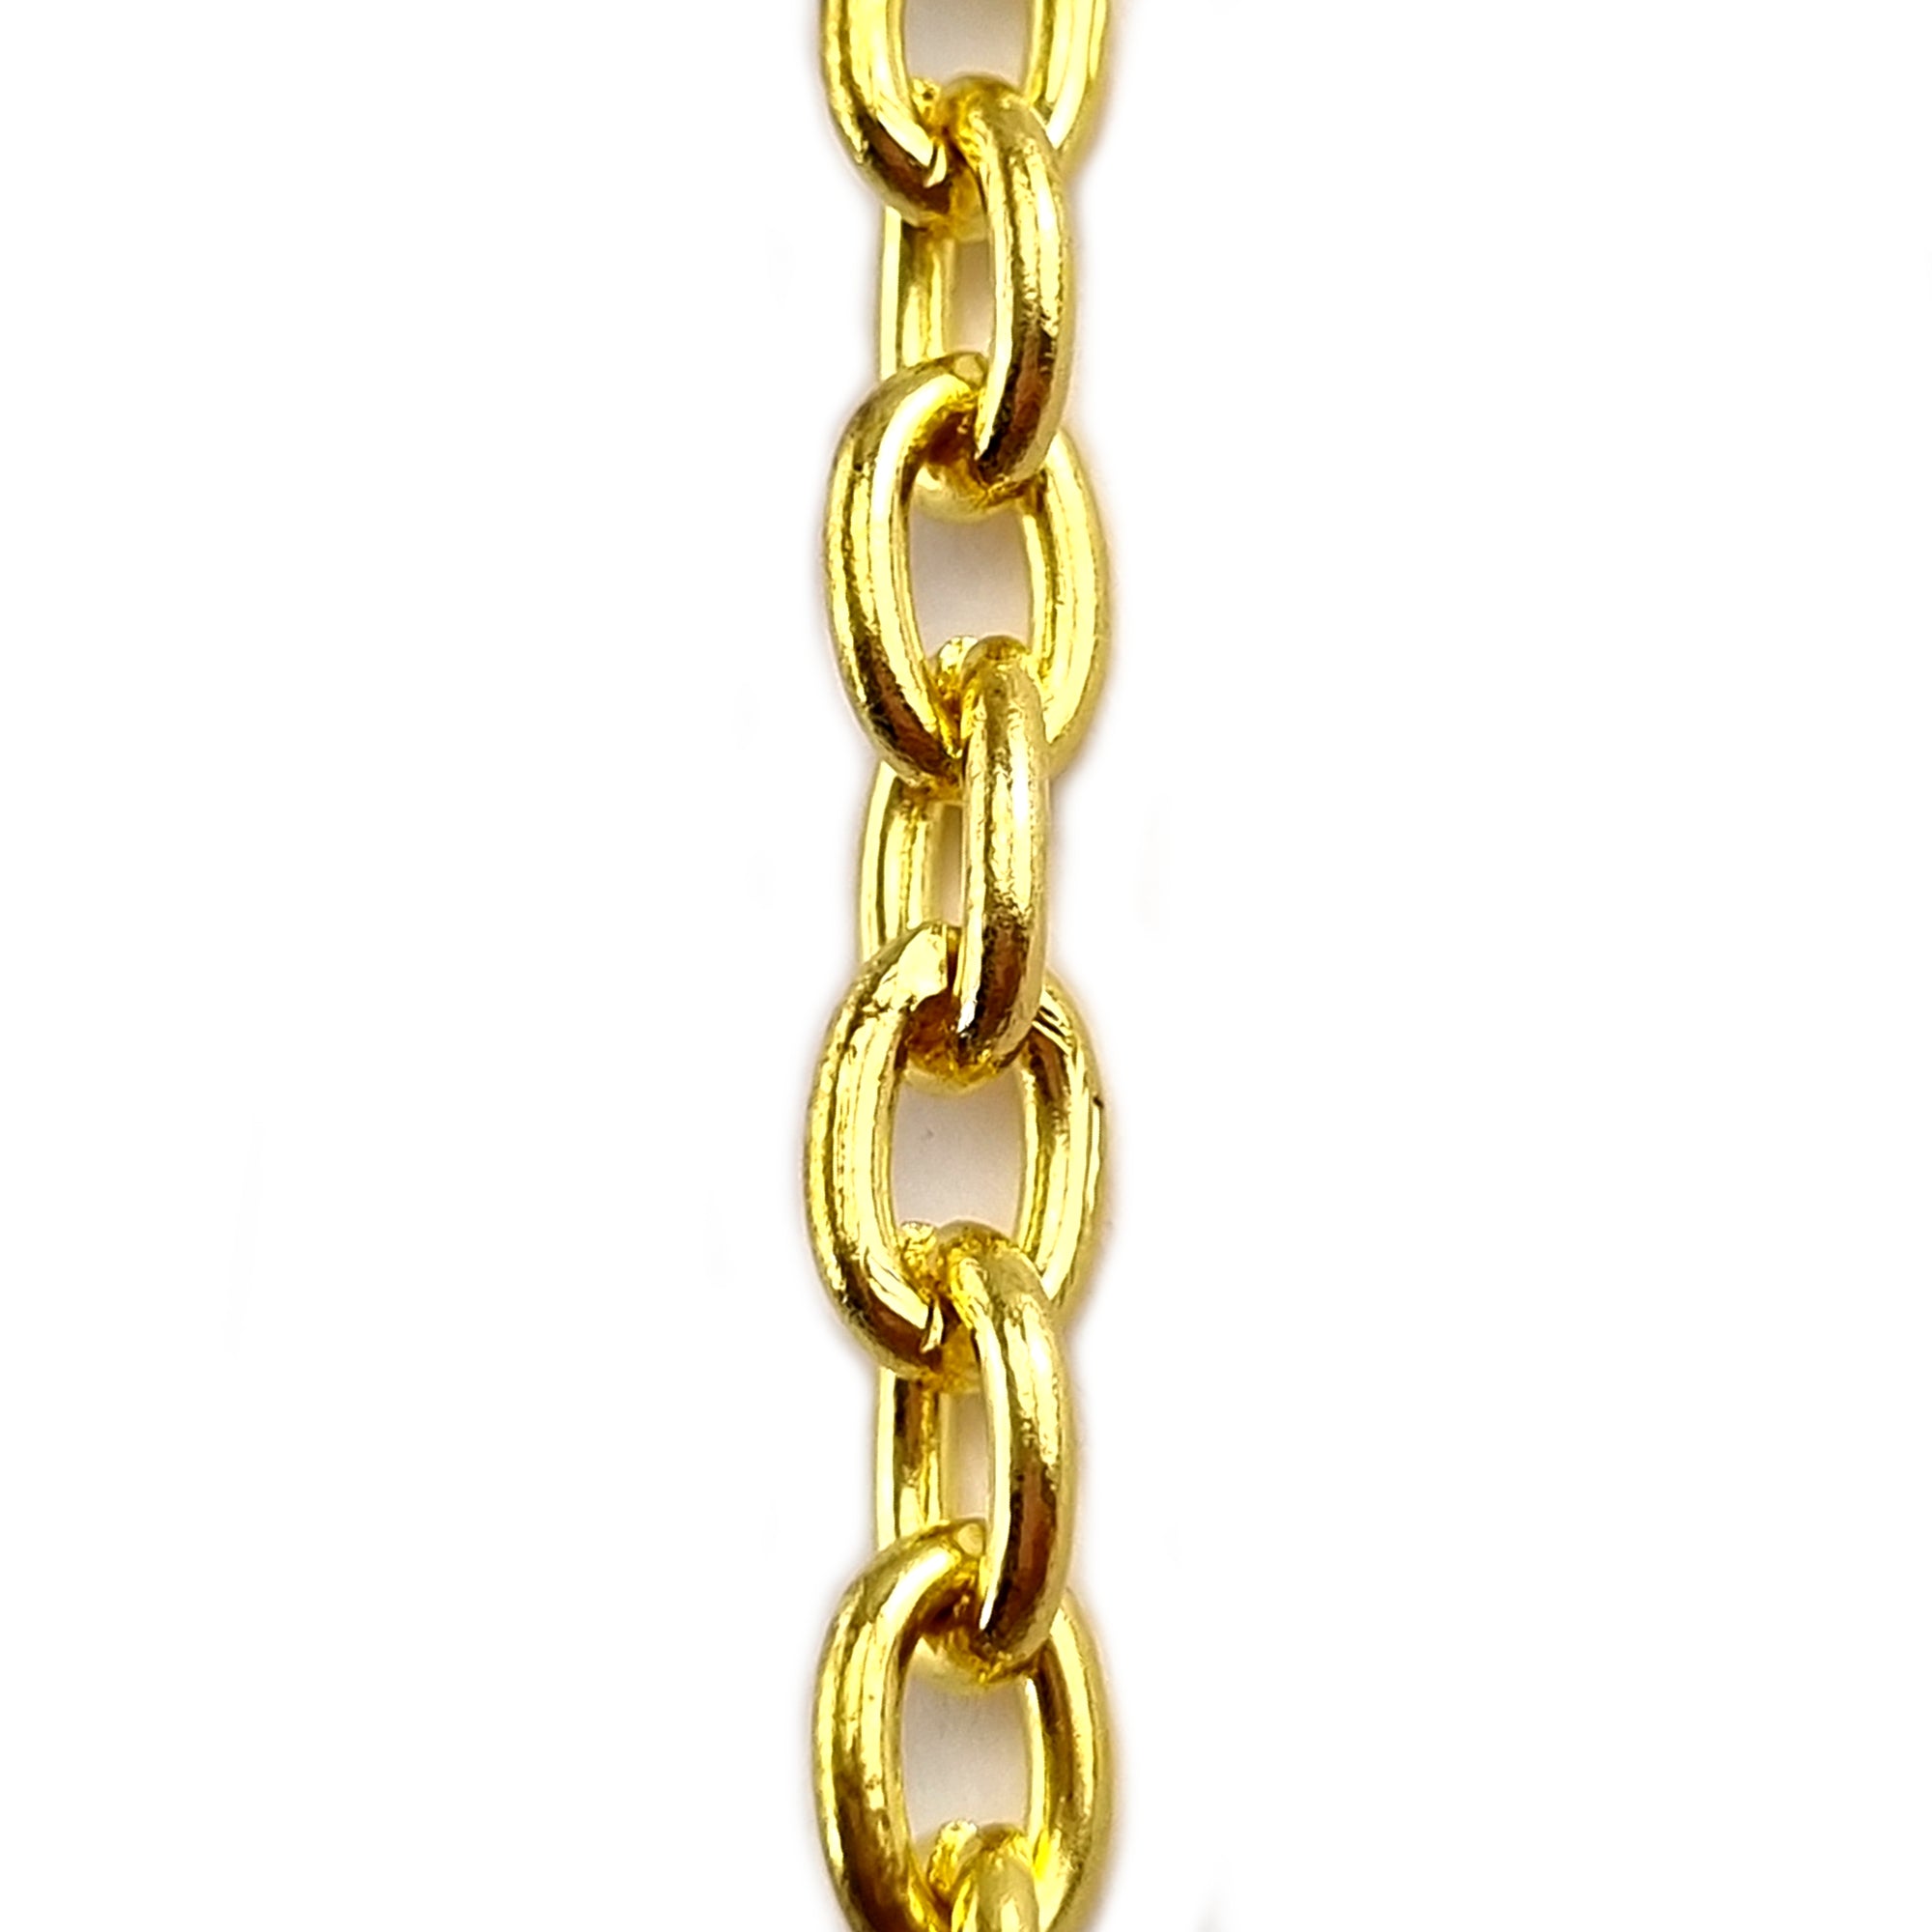 Trace Chain in a Gold Plated Finish x 25m reel. Jewellery Chain, Australia wide shipping. Shop chain.com.au